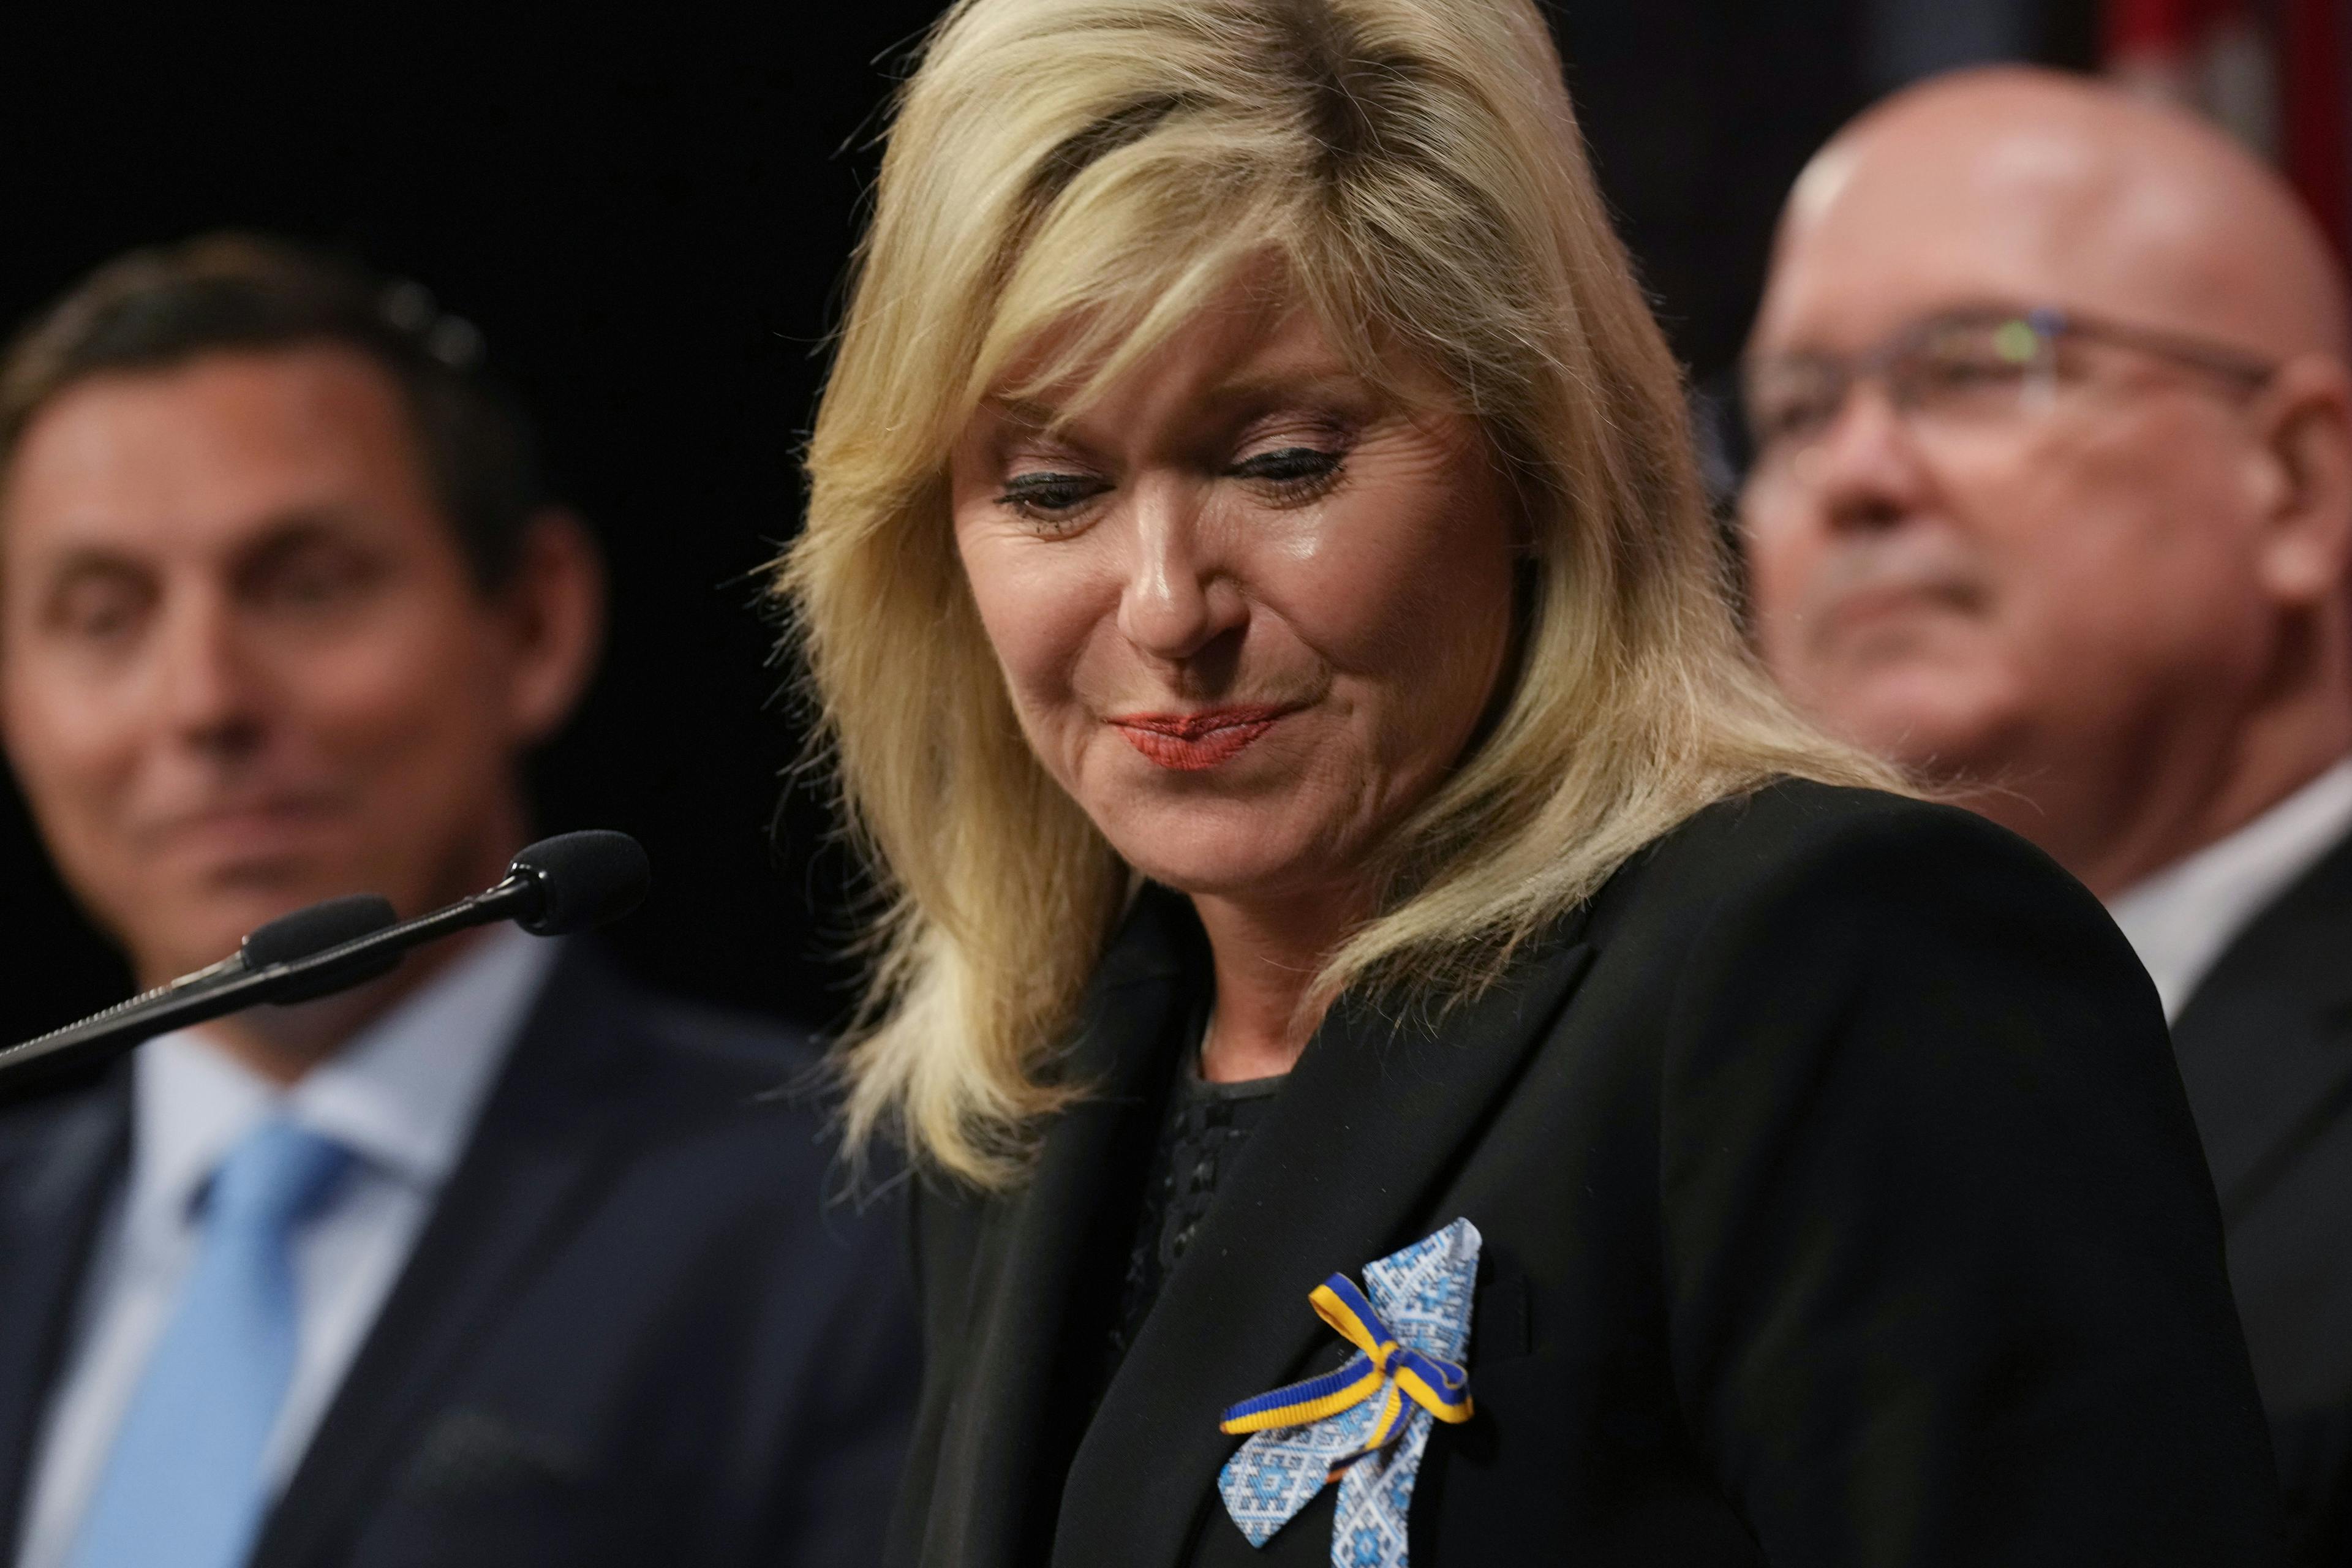 When it comes to Doug Ford, Bonnie Crombie needs to be both different and the same